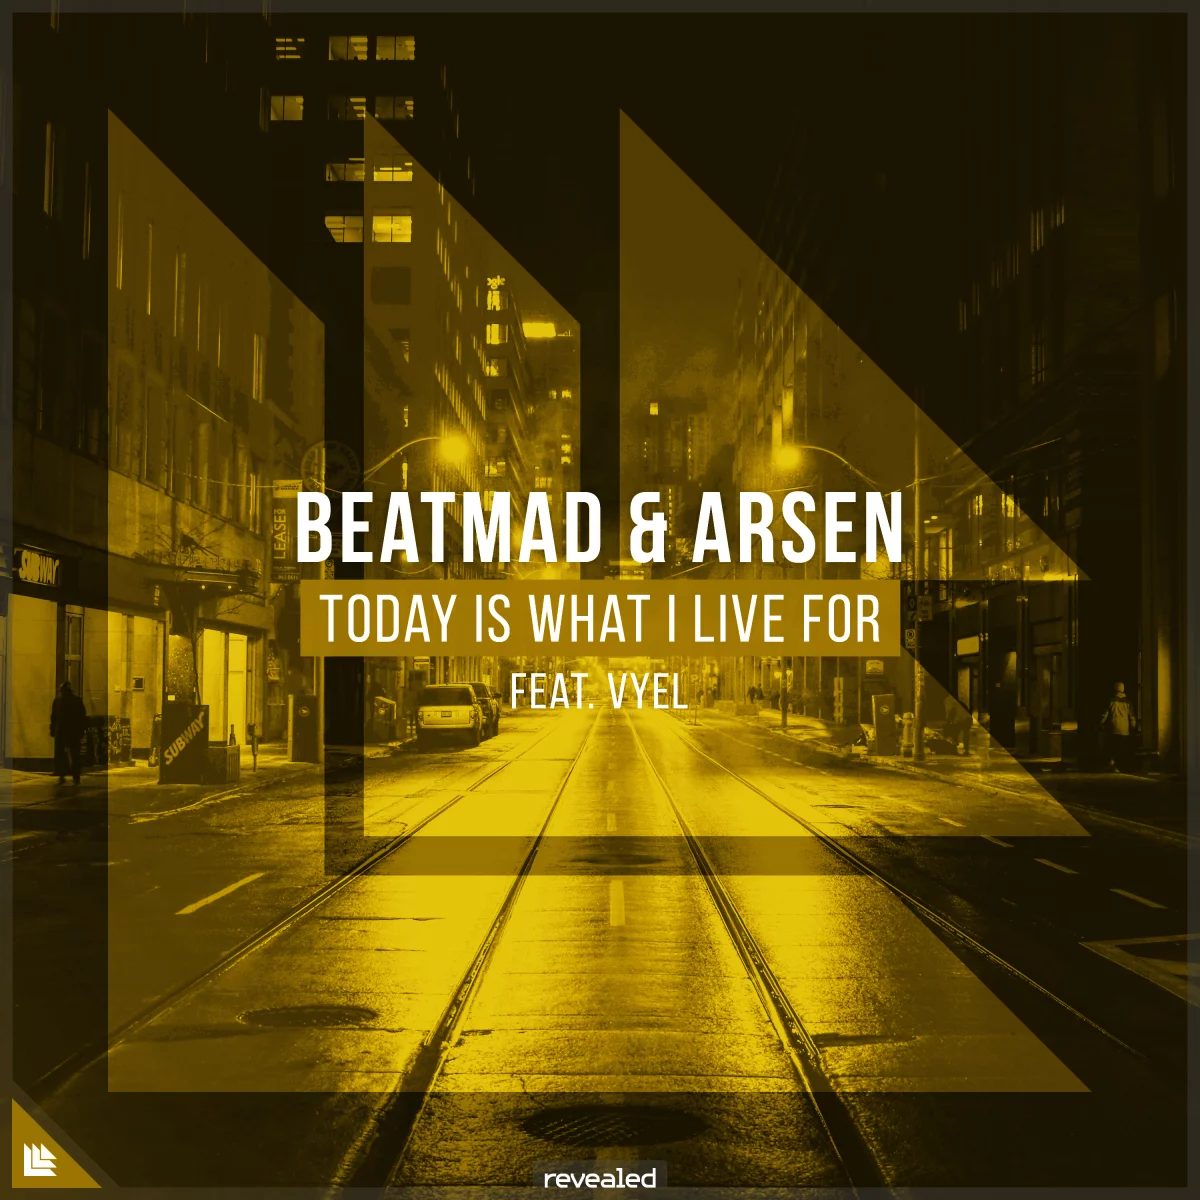 Today Is What I Live For - Beatmad⁠ Arsen⁠ Vyel⁠ 